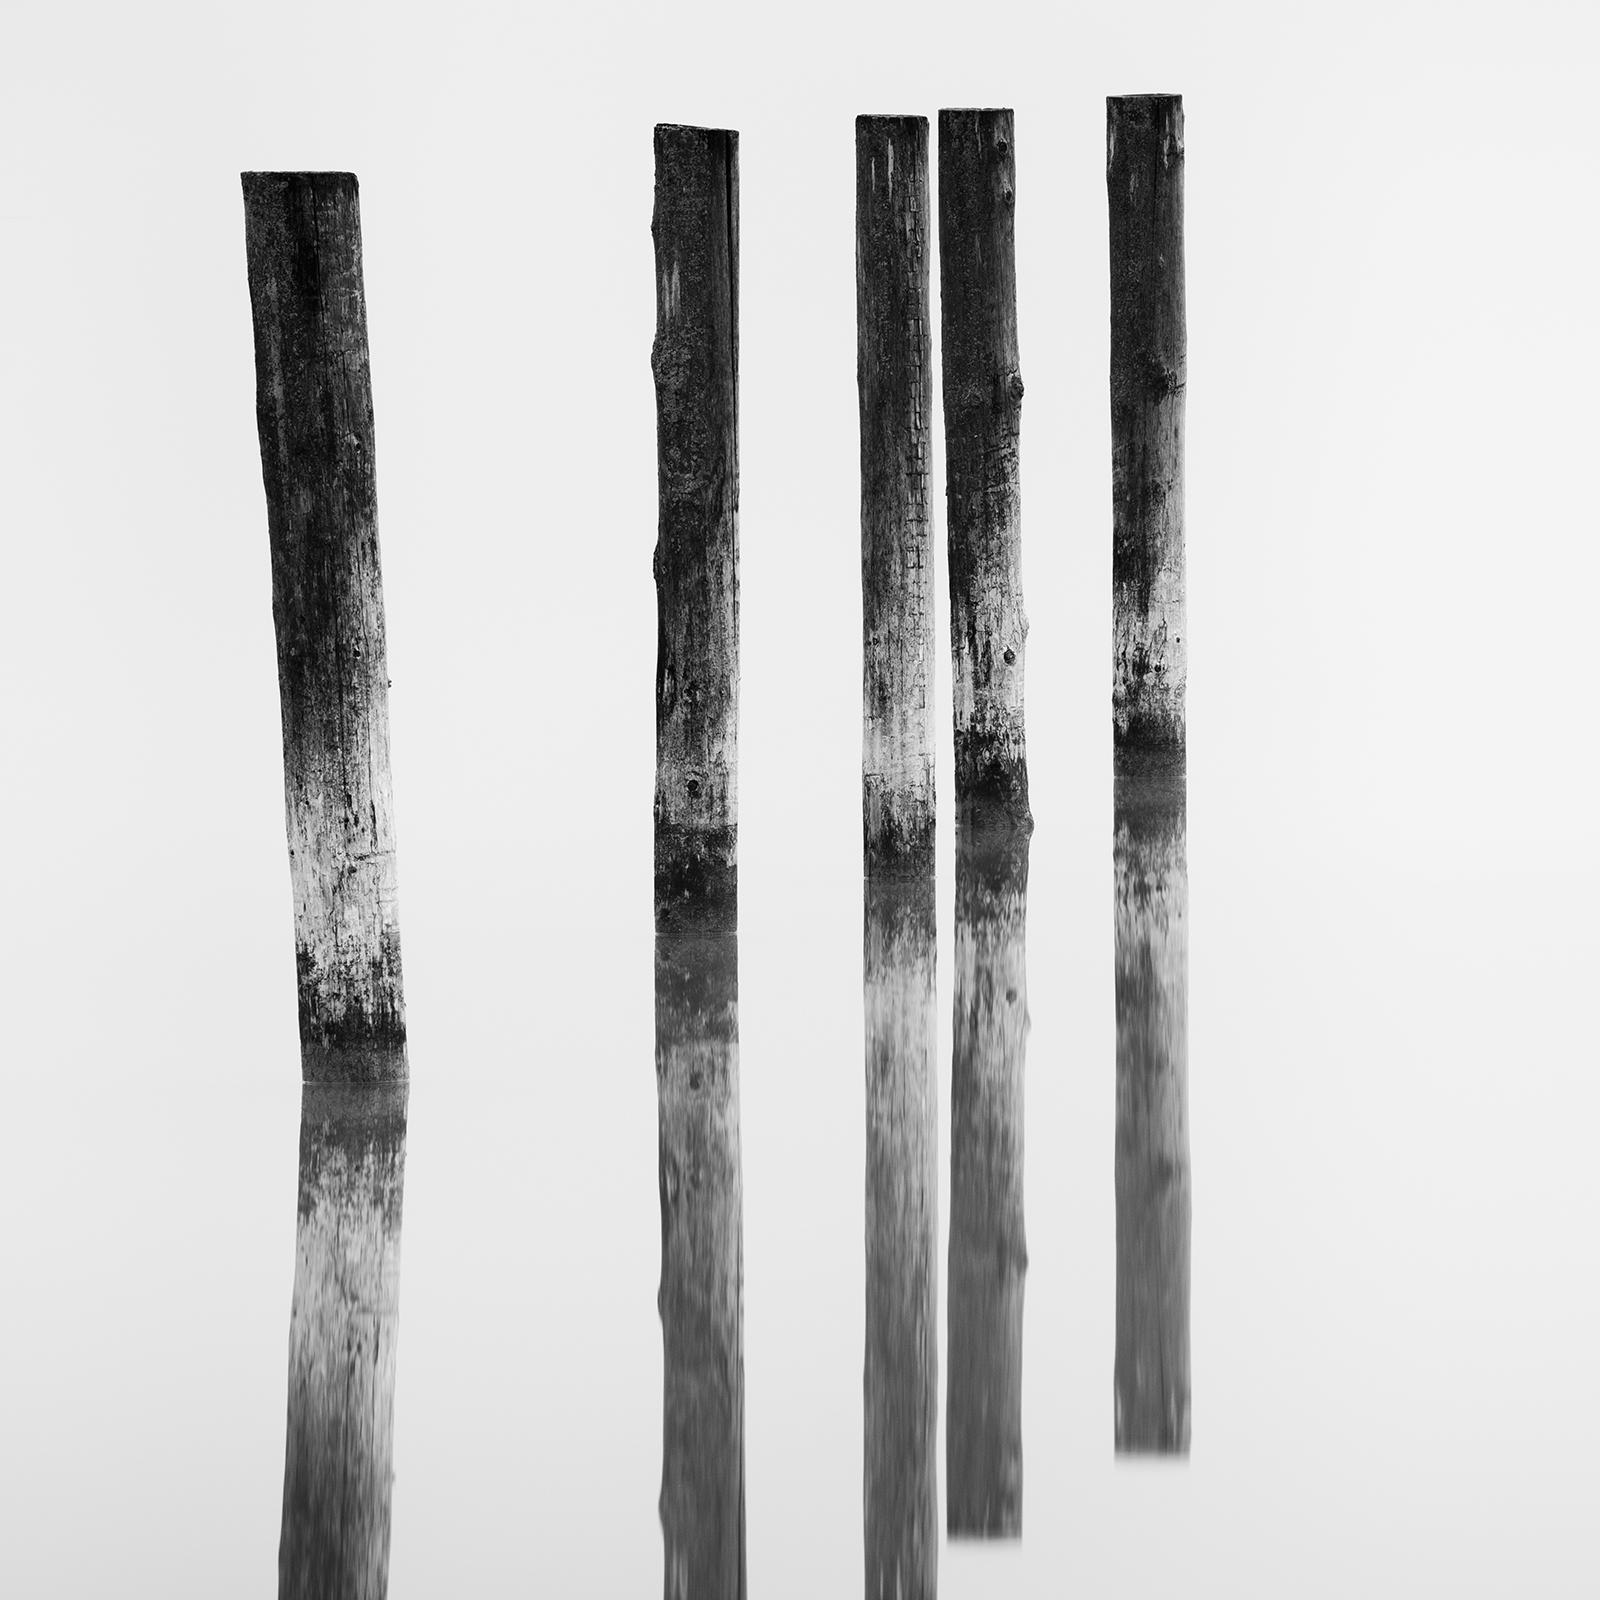 Five wooden Posts in the Lake, black and white, long exposure fineart waterscape For Sale 4